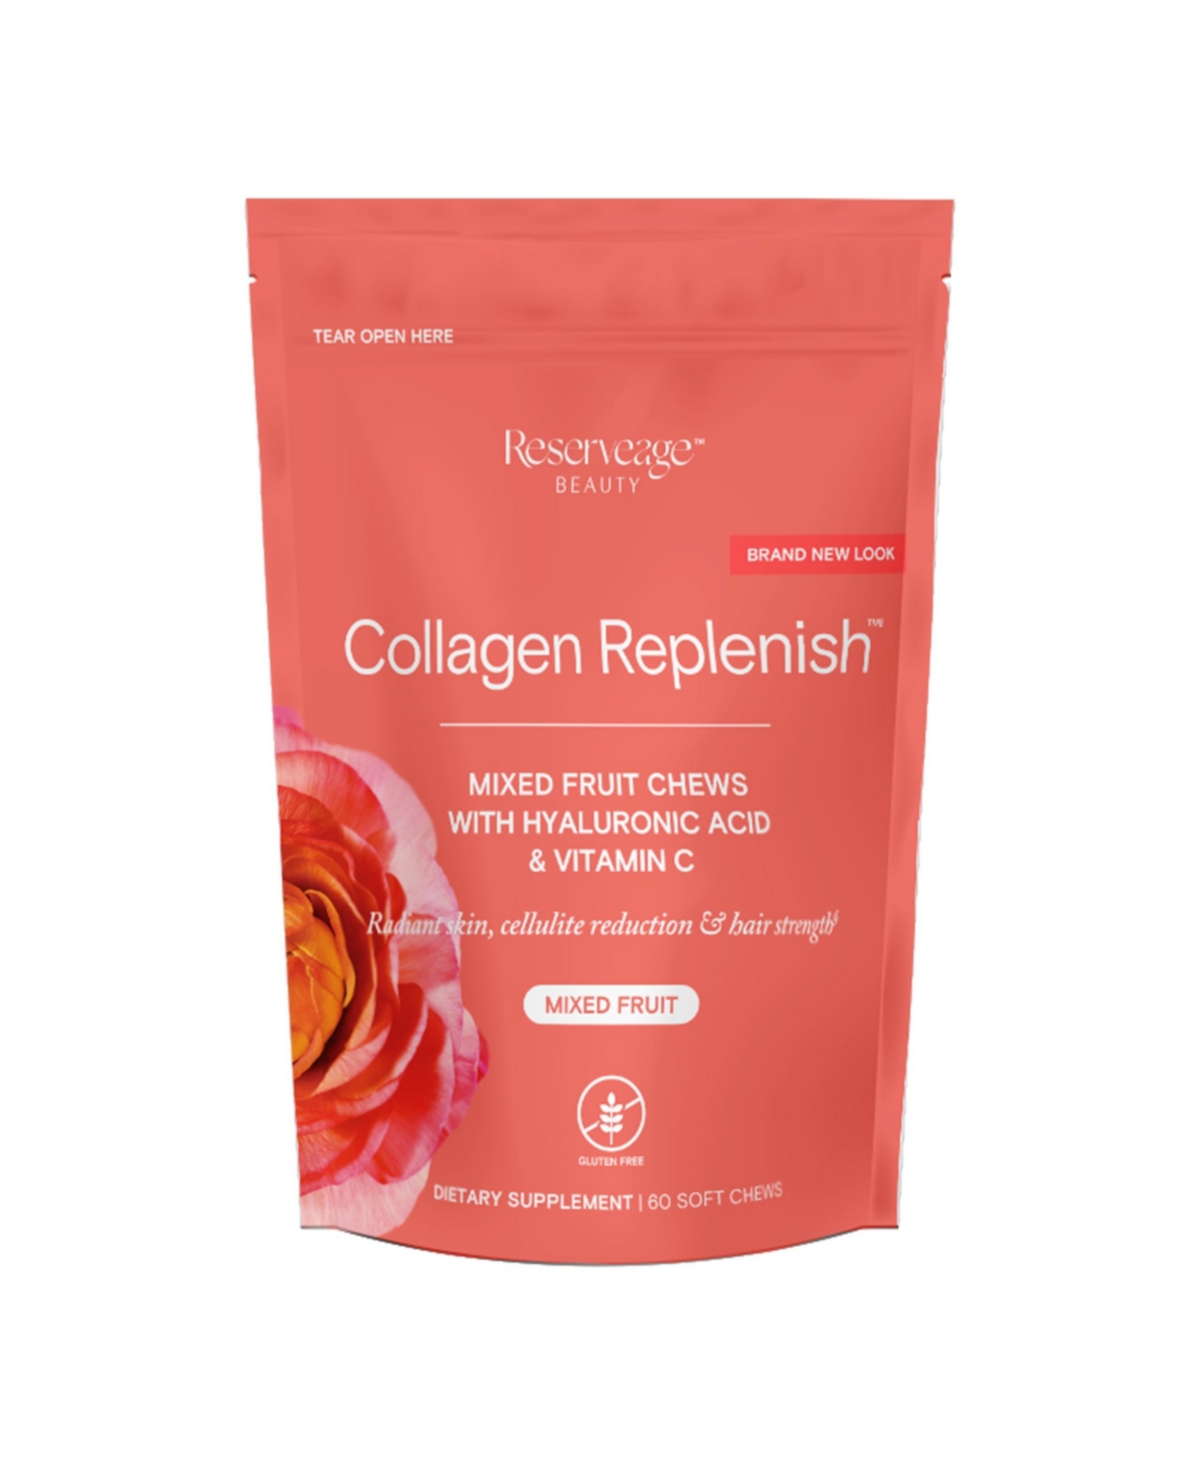 Collagen Replenish Chews, Skin and Nail Supplement, Supports Collagen and Elastin Production, 60 Soft Chews (30 Servings)